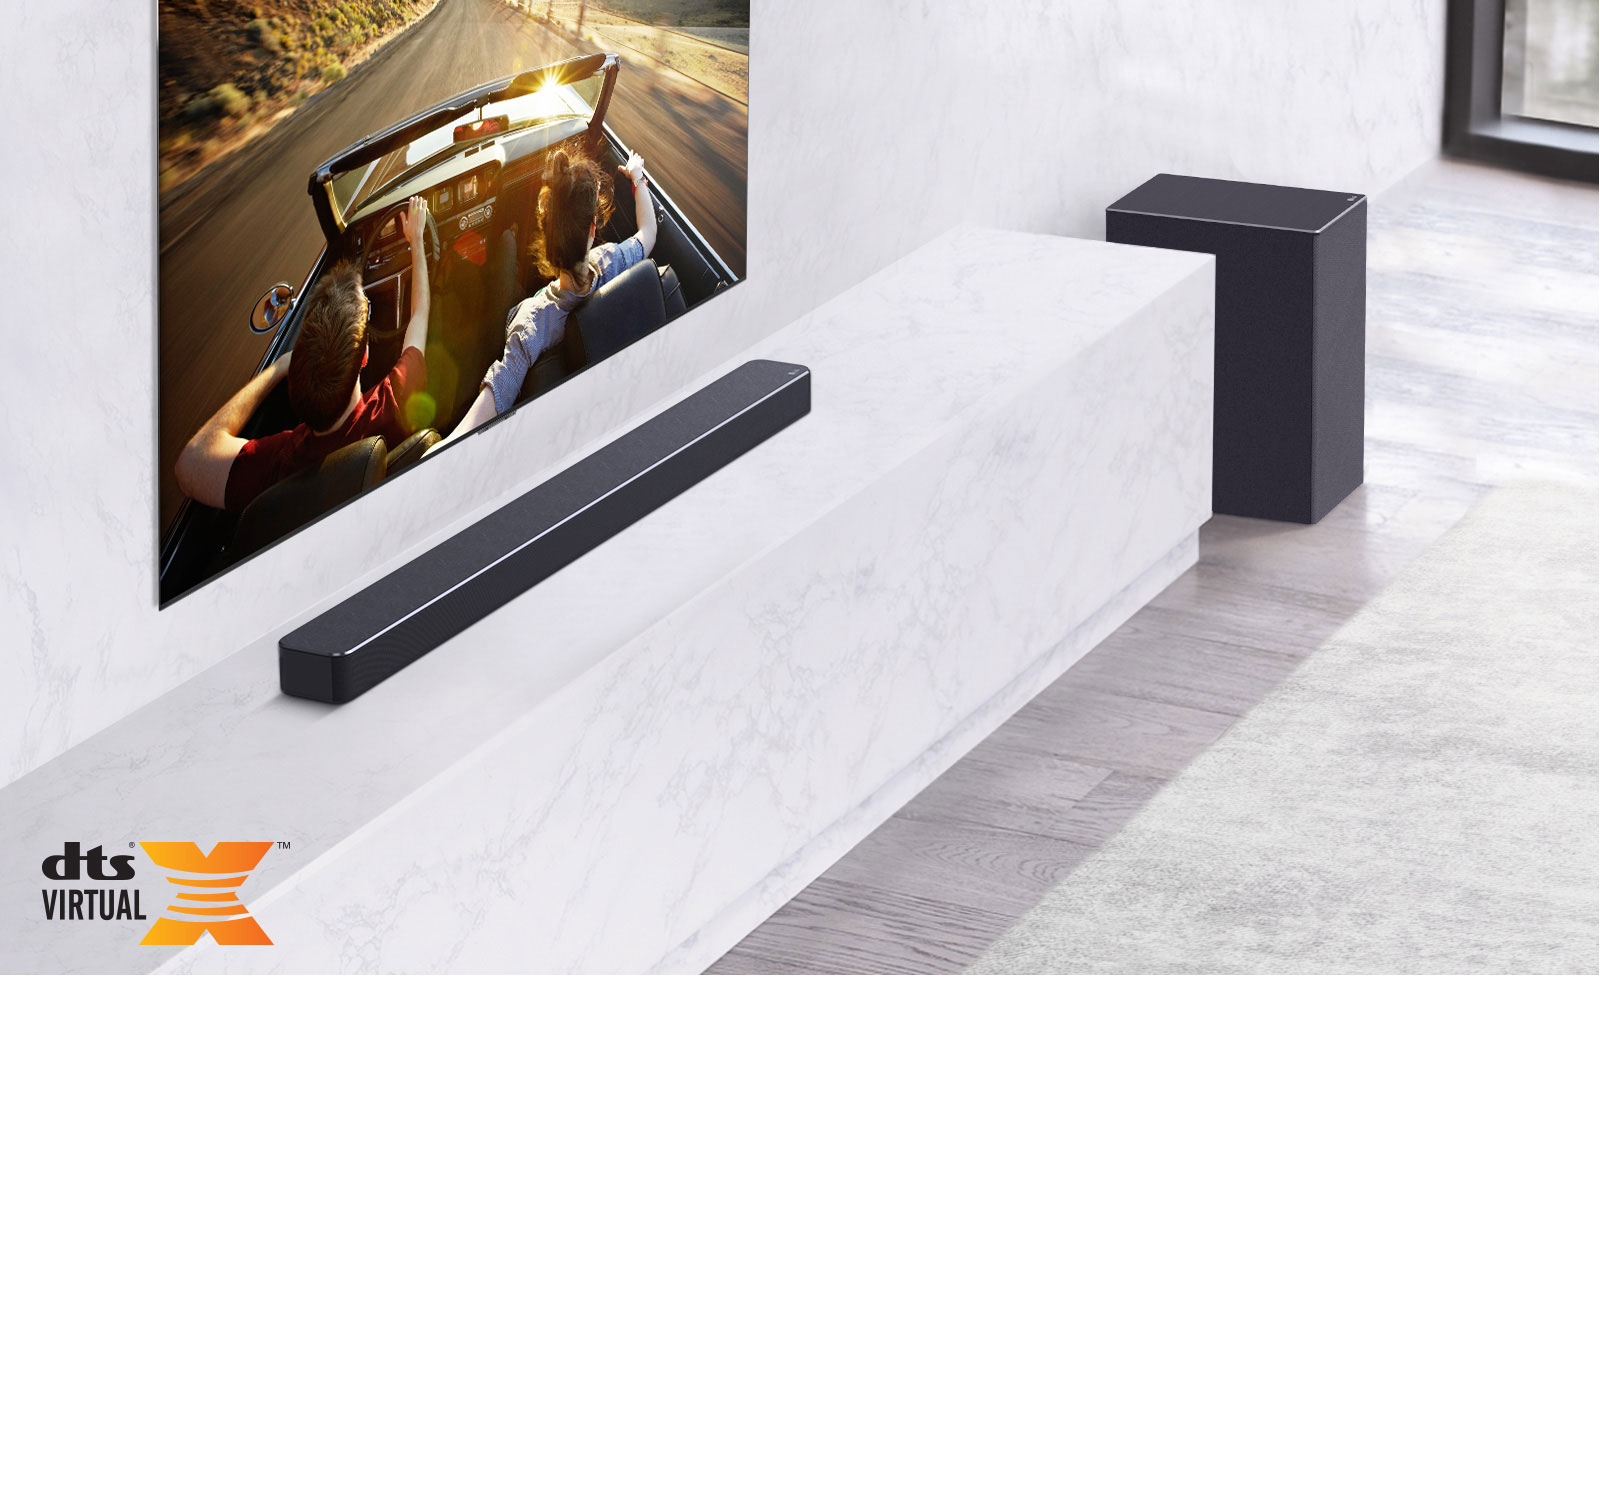 TV is on the wall, LG Soundbar is below on a white marble shelf with a sub-woofer to the right. TV shows a couple in a car. 